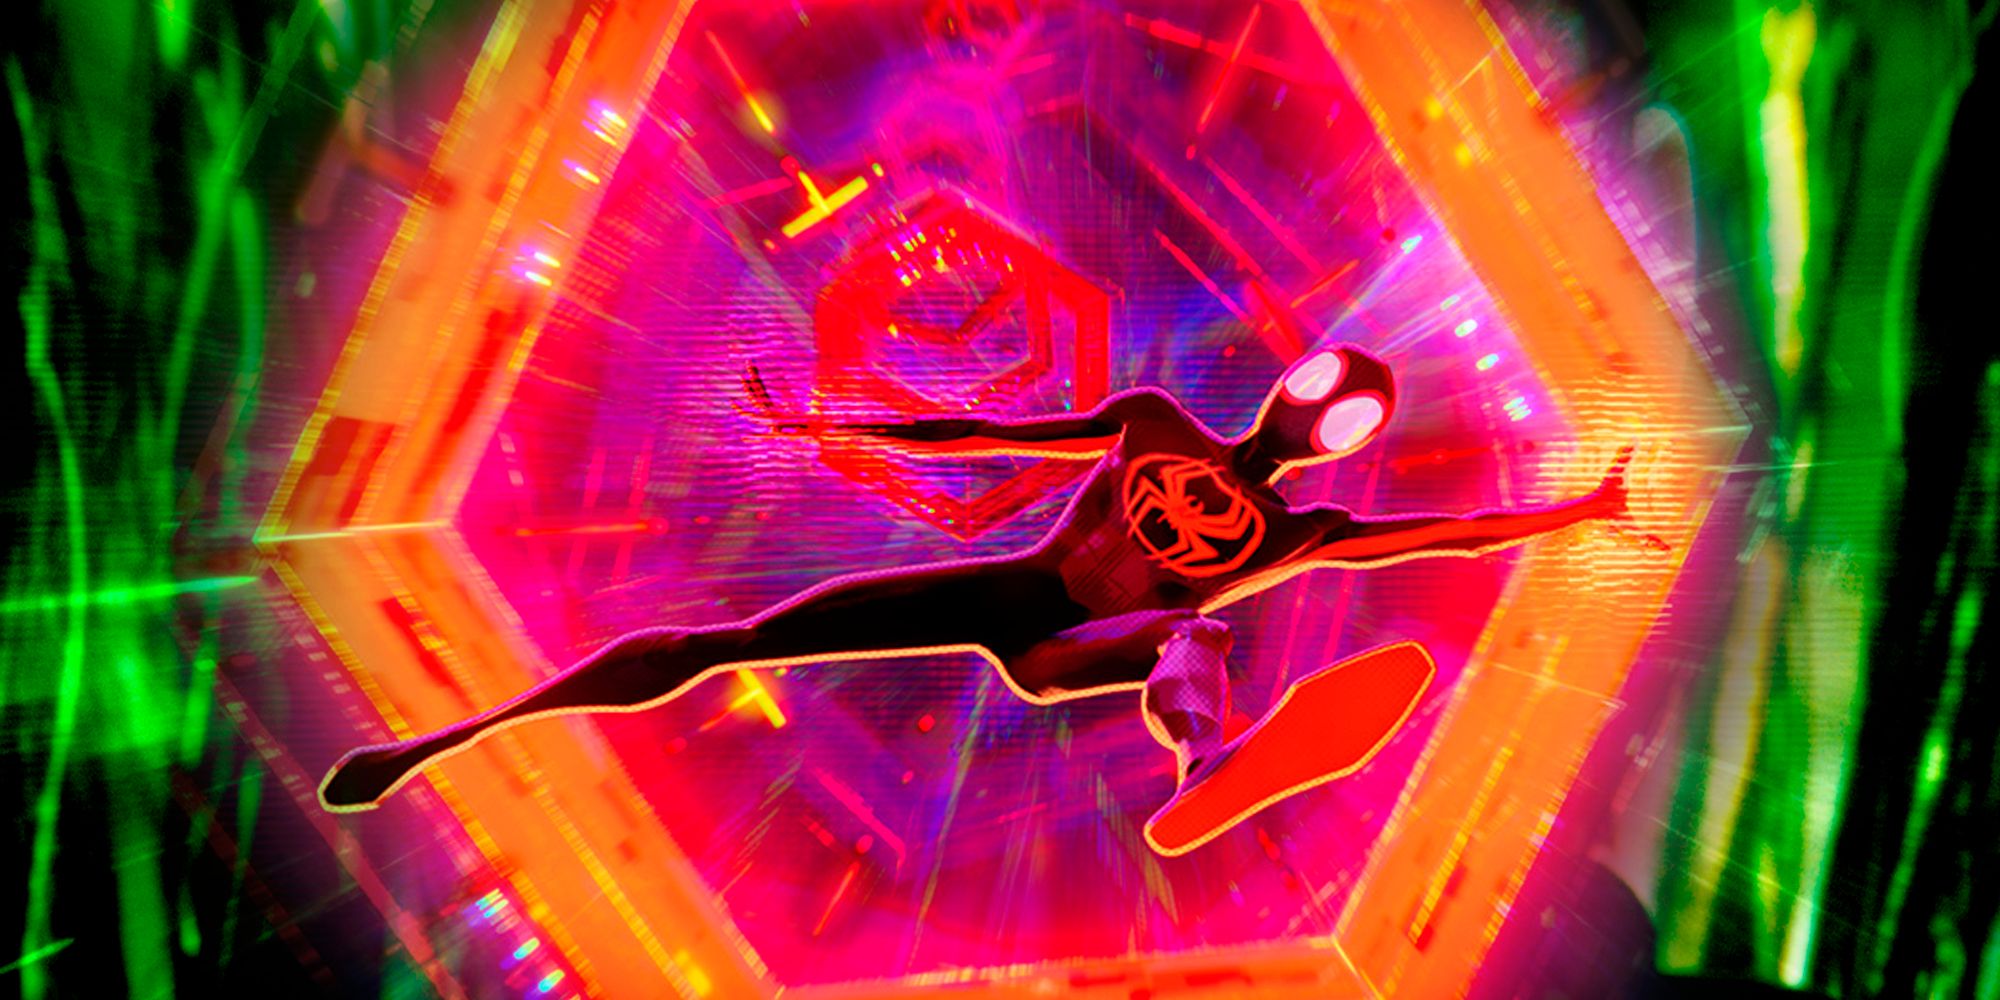 Miles Morales falls through the Mutliversal portal in Spider-Man: Across the Spider-Verse